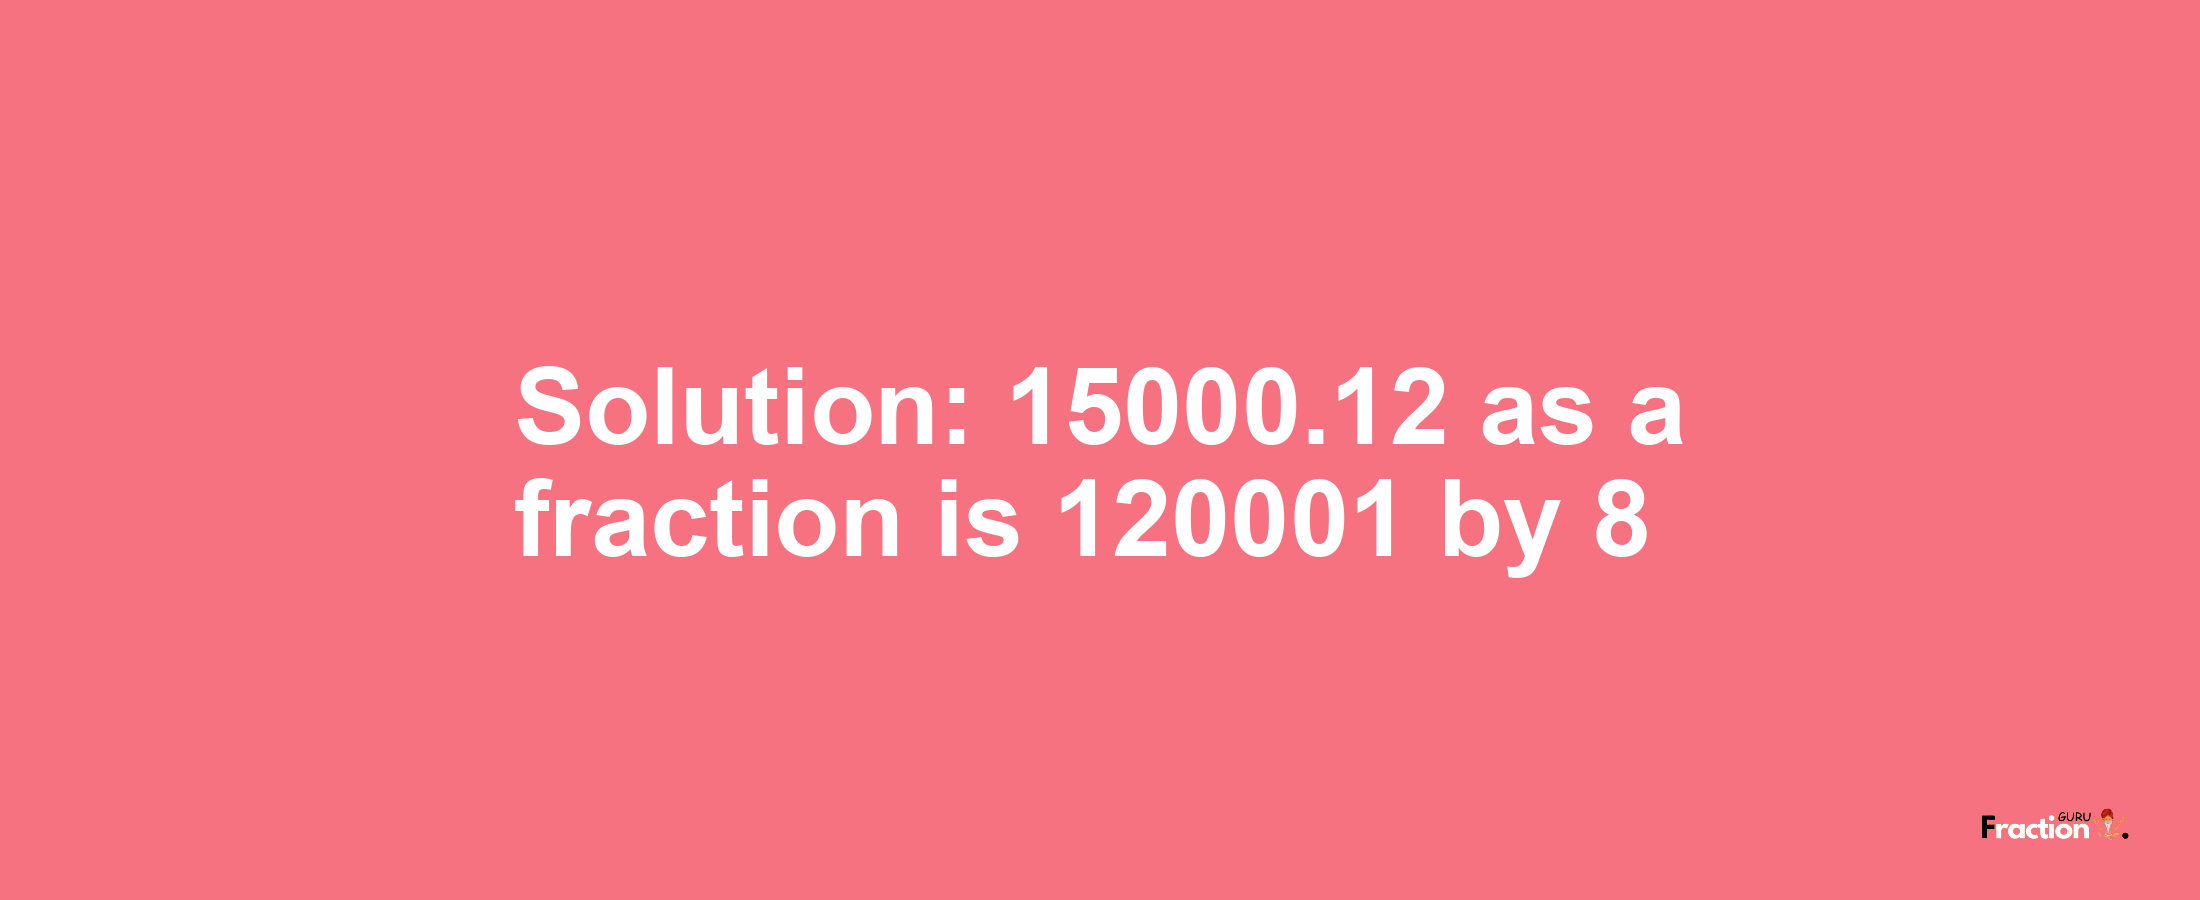 Solution:15000.12 as a fraction is 120001/8